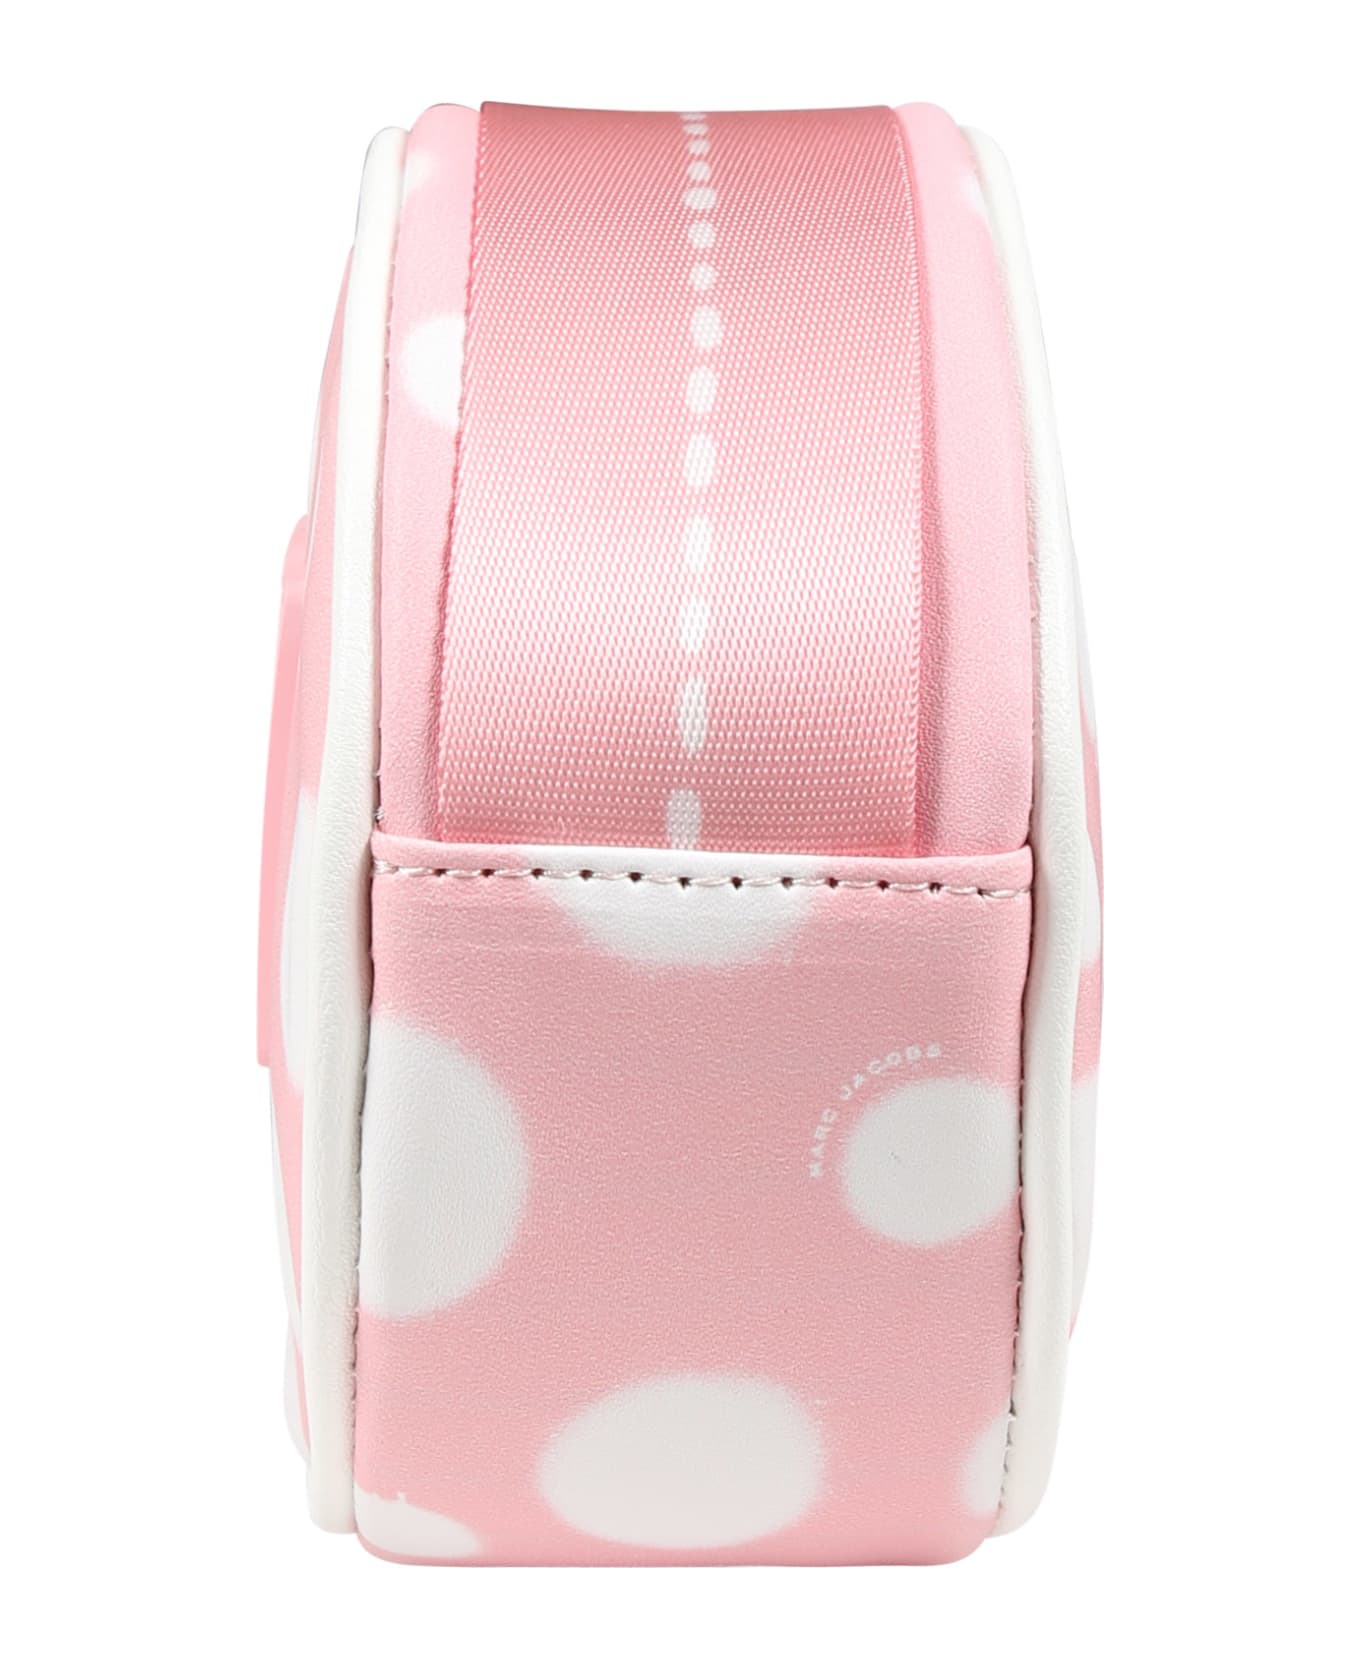 Marc Jacobs Pink Bag For Girl With All-over White Polka Dots - Rosa